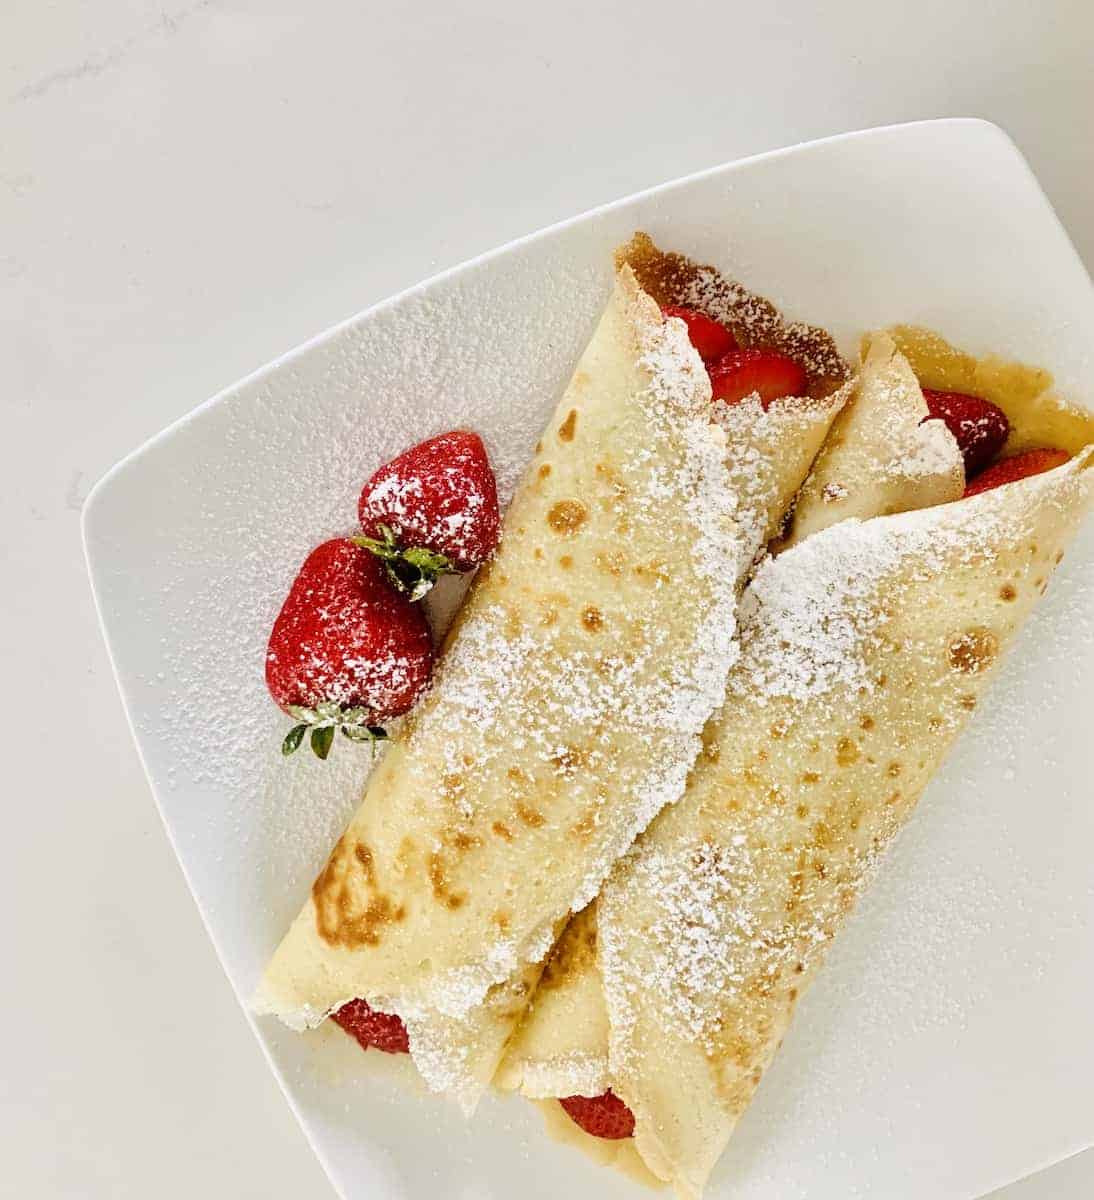 Birds eye view of 2 crepes filled with strawberries sprinkled with powdered sugar, and two strawberries also on the white plate. Red text: "Gluten-Free Crepes". 
